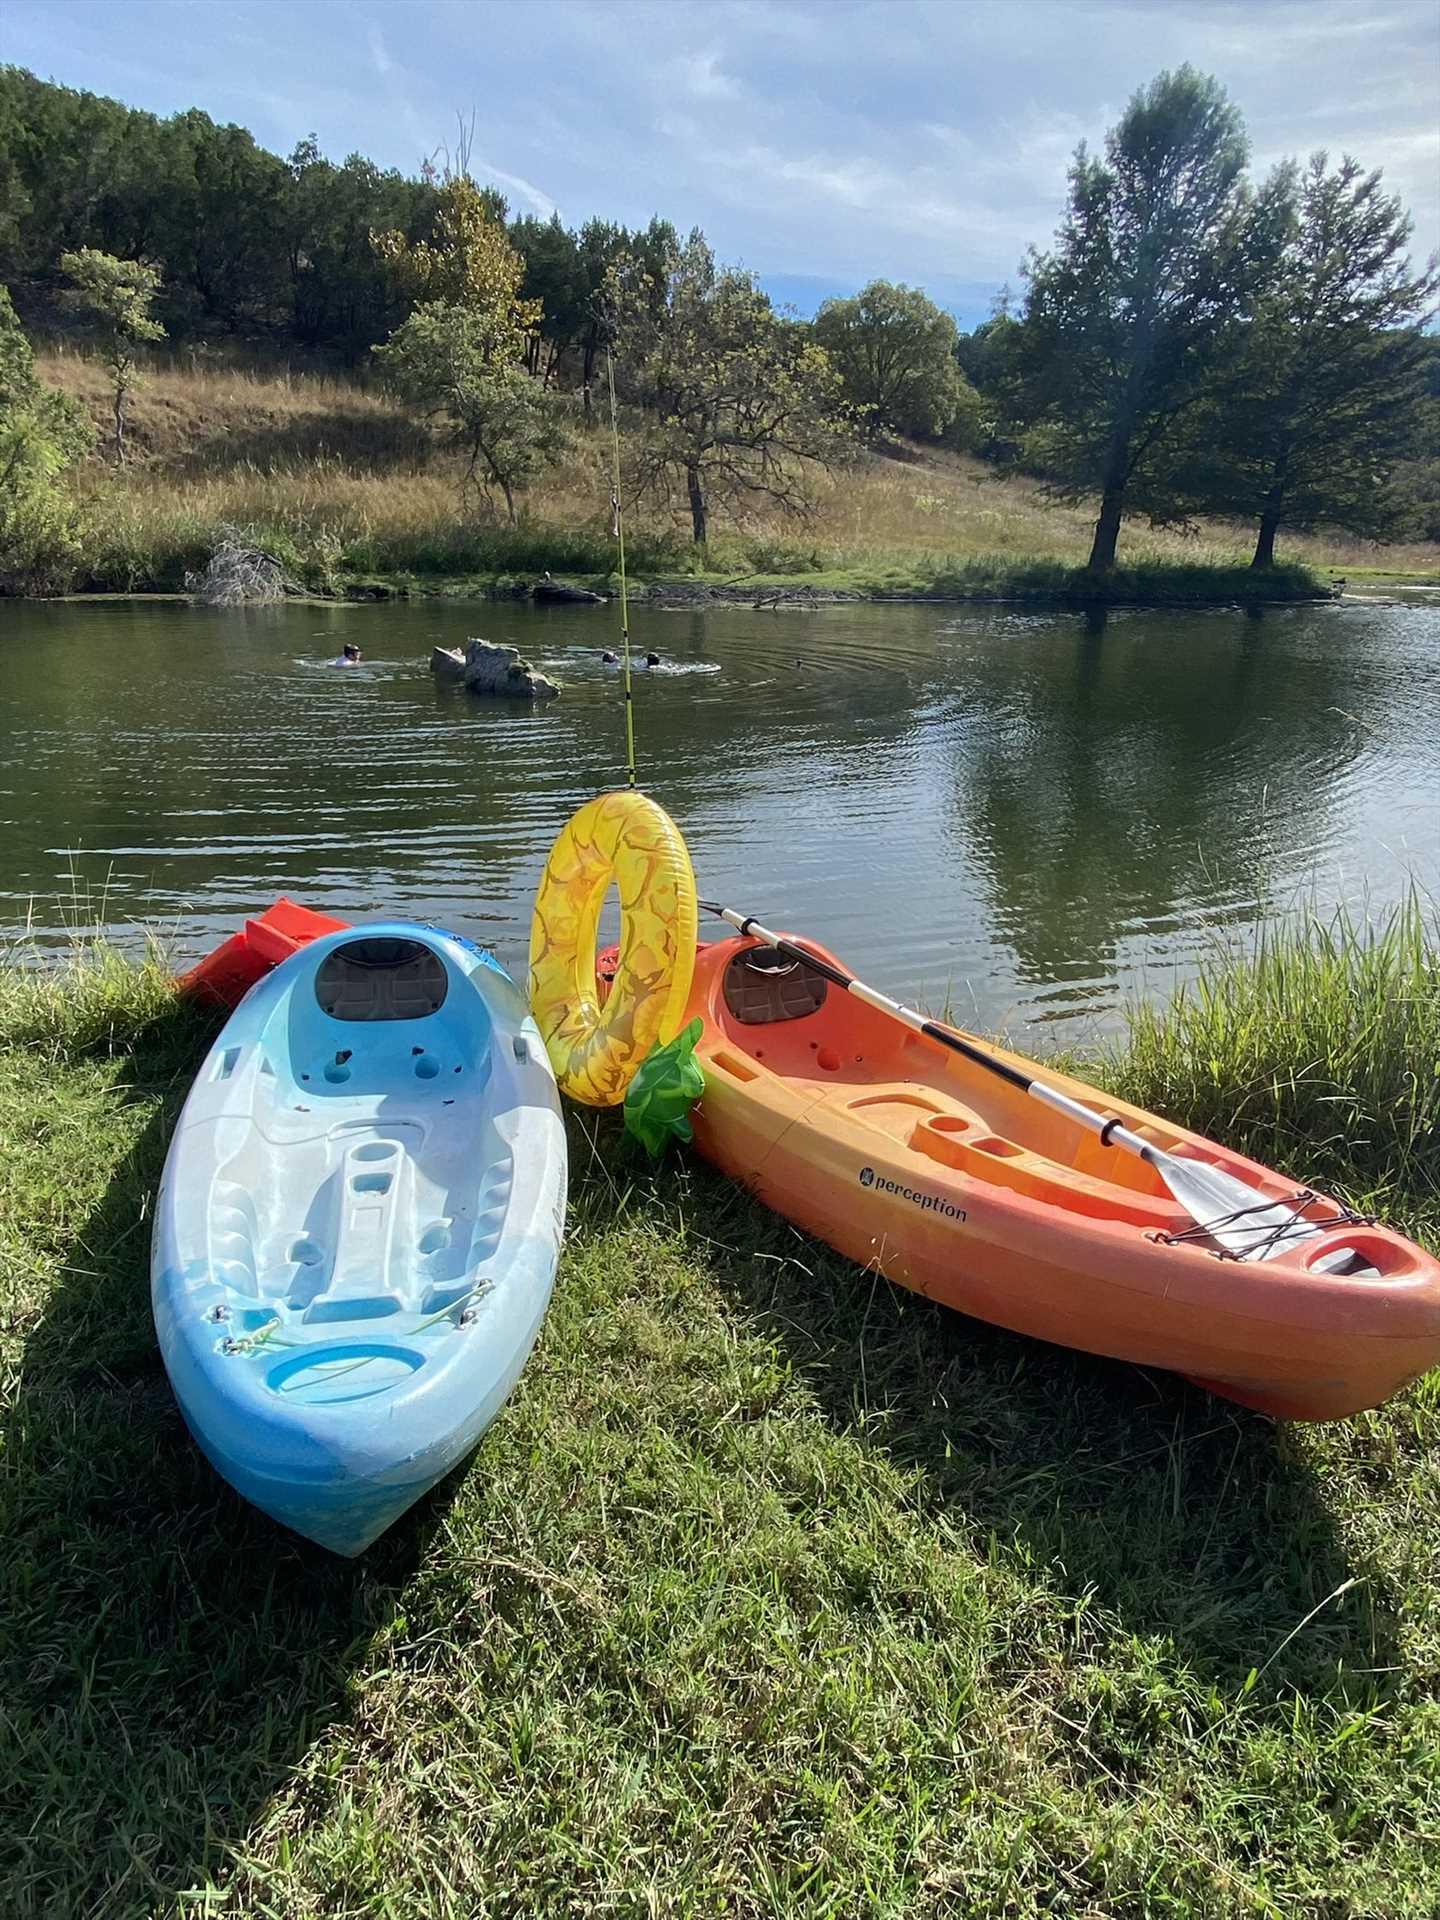                                                 You'll also have access to kayaks when you visit Forse Mountain Ranch. No need to bring your own!